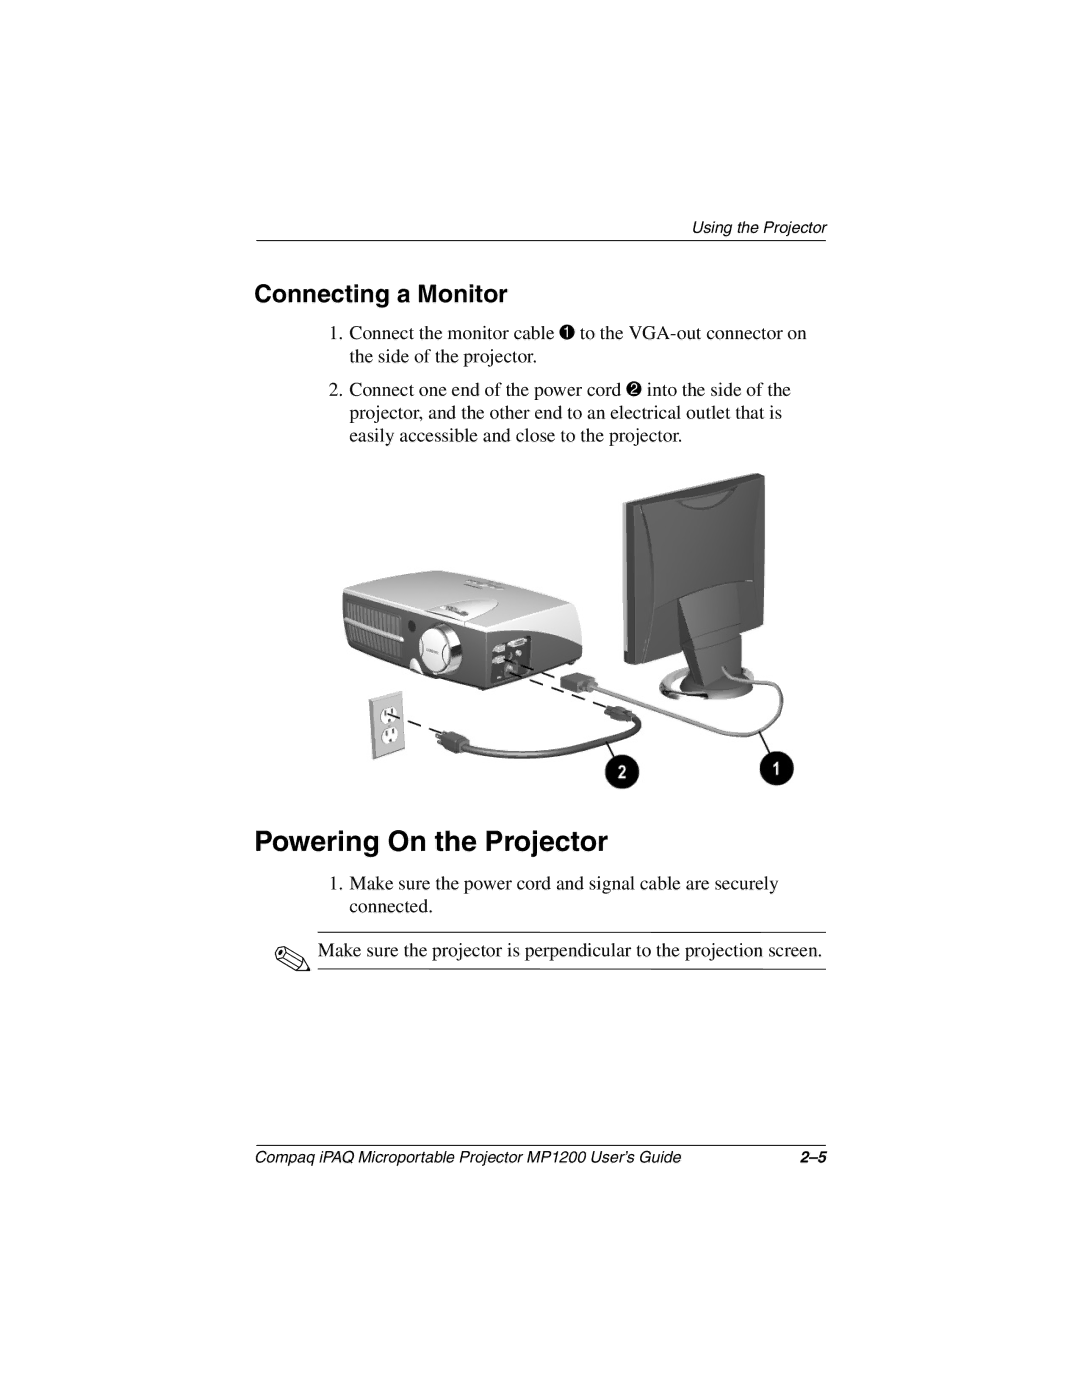 Compaq MP1200 manual Powering On the Projector, Connecting a Monitor 